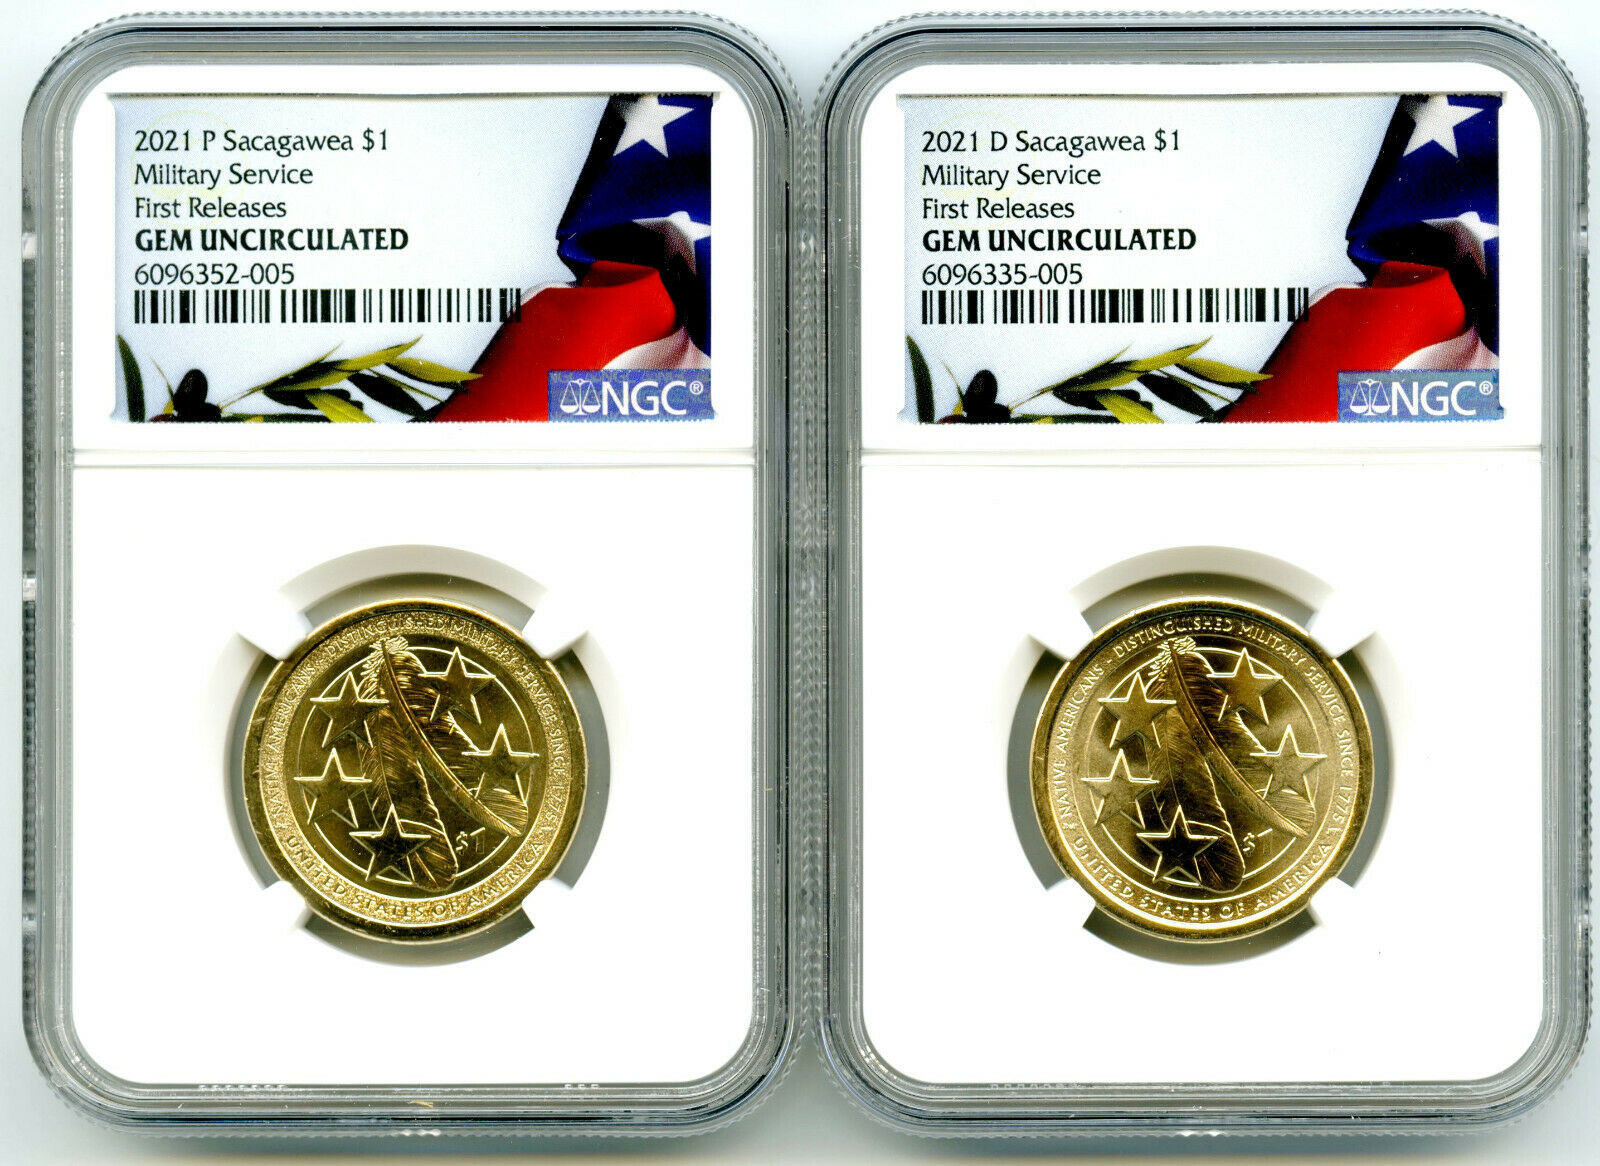 2021 P D $1 Sacagawea Ngc Gem Unc Military Service Dollar First Releases Set